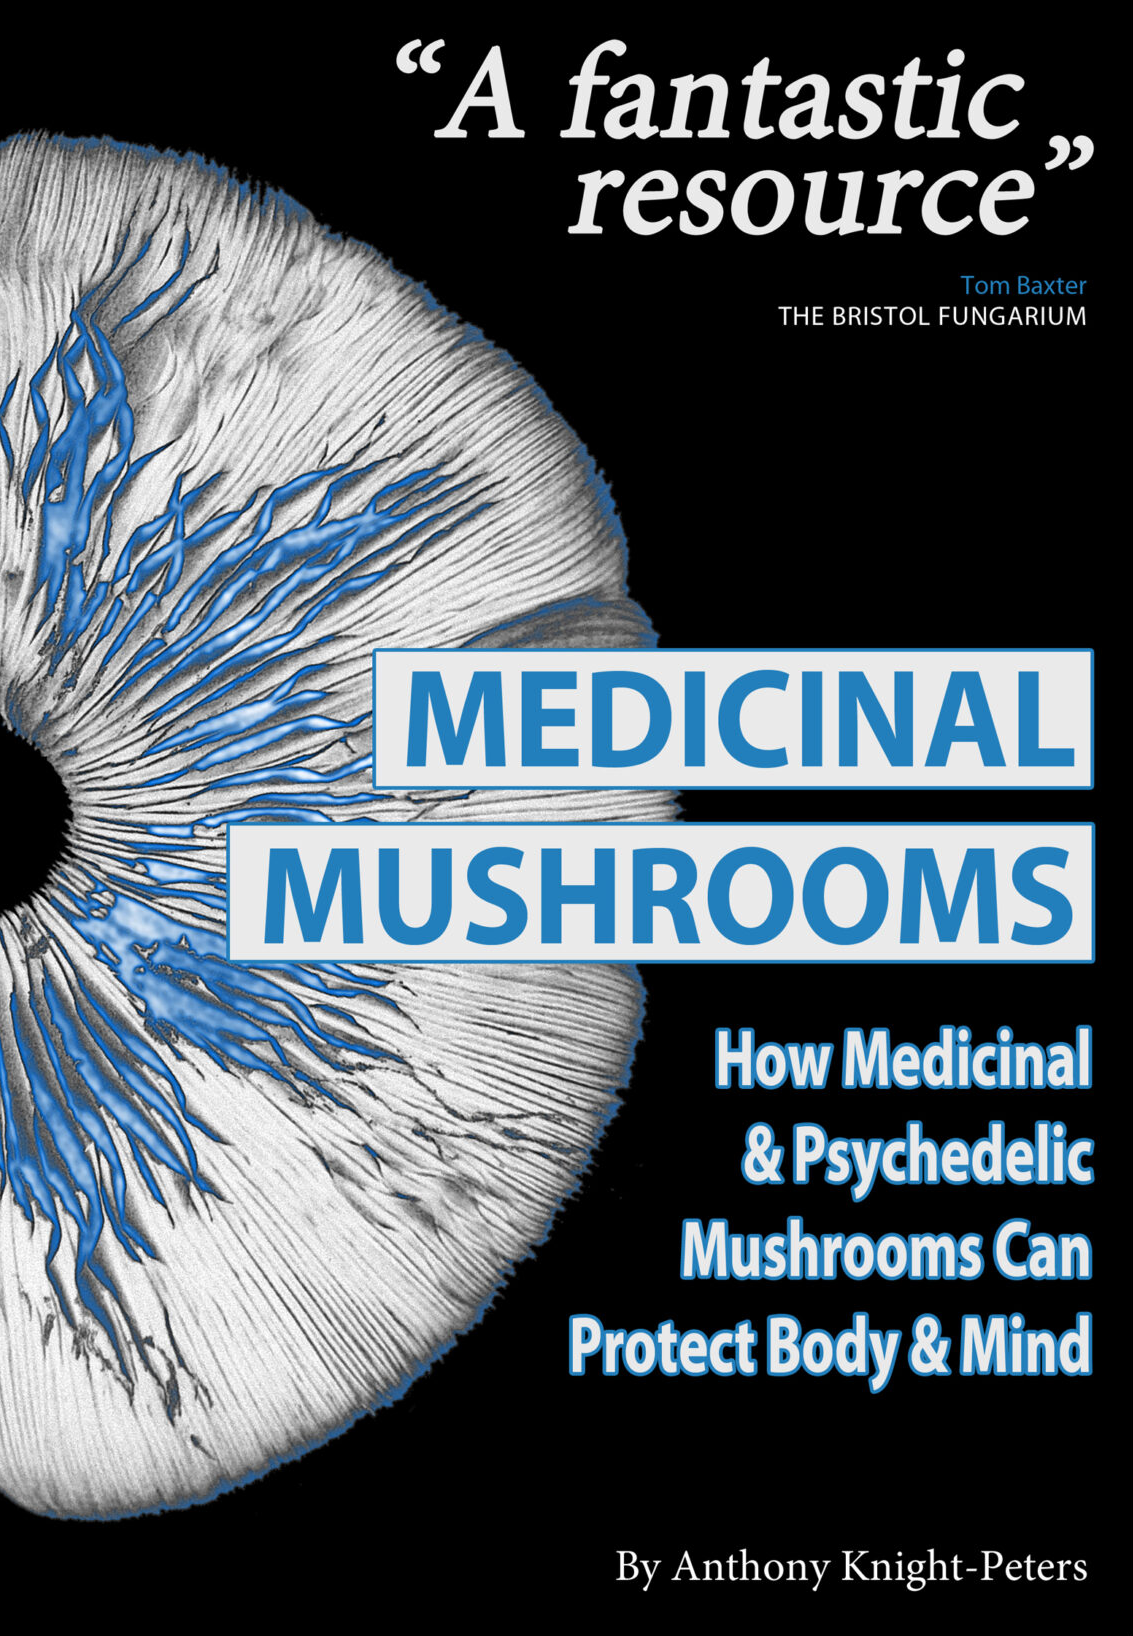 MycoPunks - MEDICINAL MUSHROOMS: How Medicinal and Psychedelic Mushrooms Can Protect Body and Mind - Book